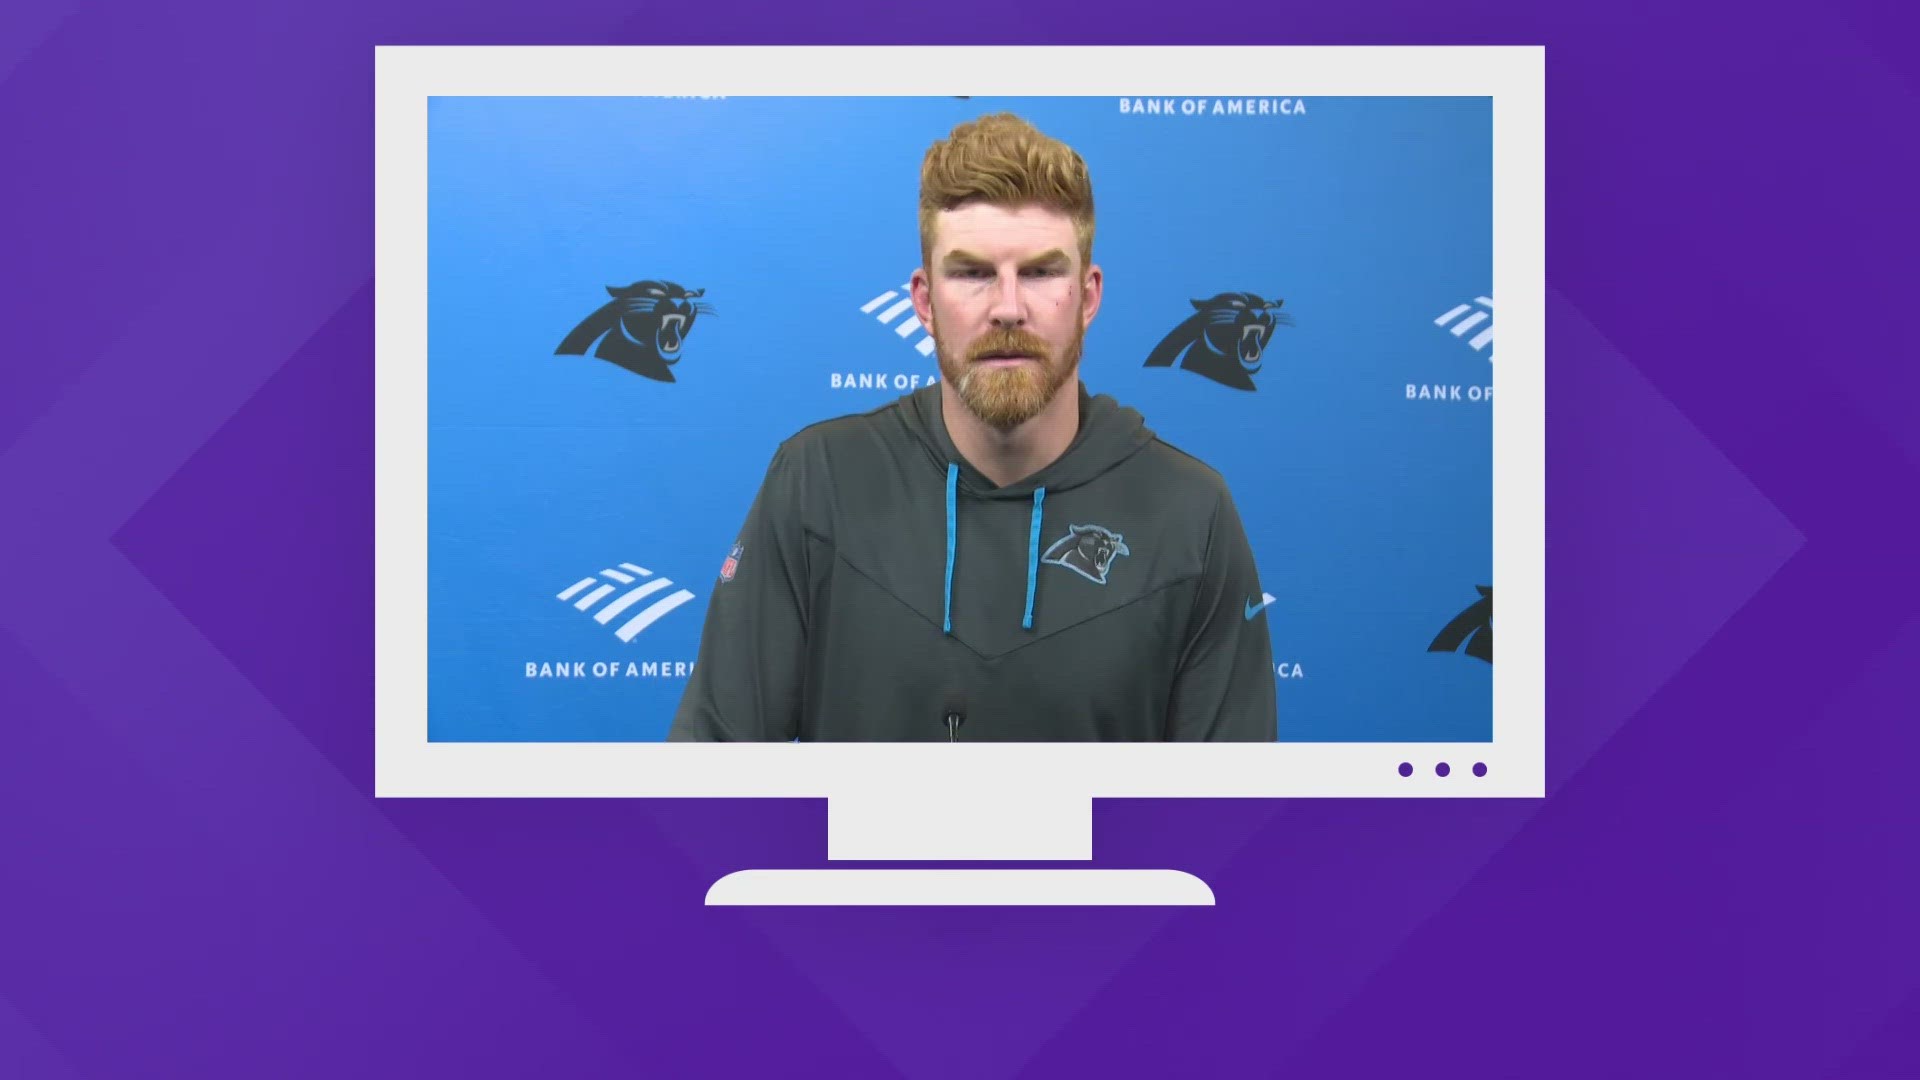 Quarterback is arguably the most important position, but it's also the hardest to evaluate. Andy Dalton talks about mentoring a rookie QB.